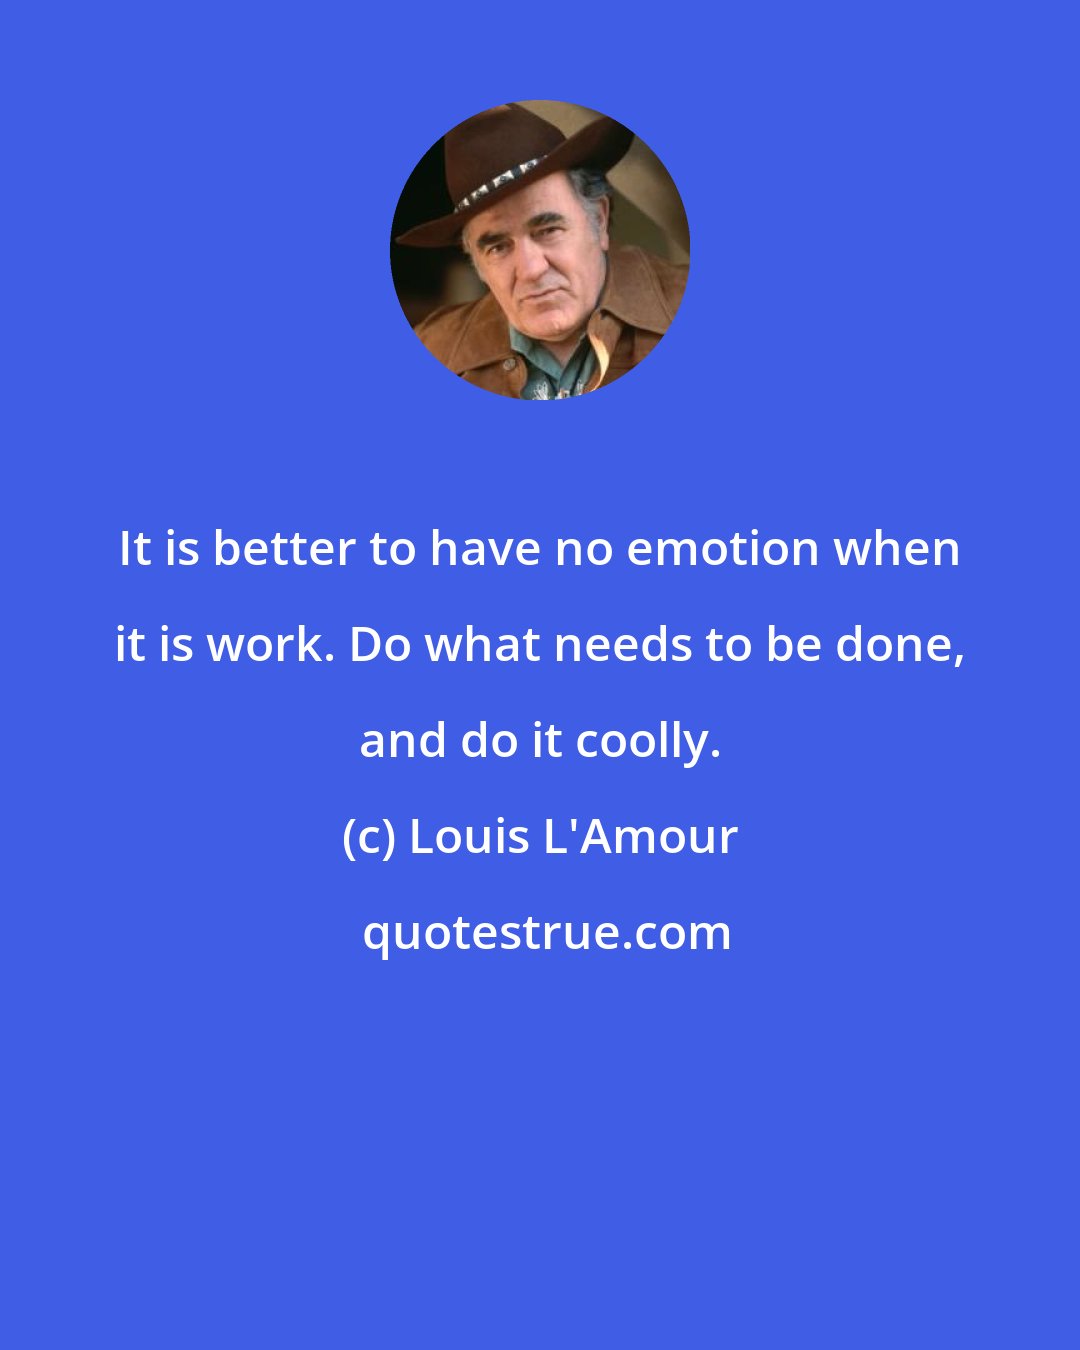 Louis L'Amour: It is better to have no emotion when it is work. Do what needs to be done, and do it coolly.